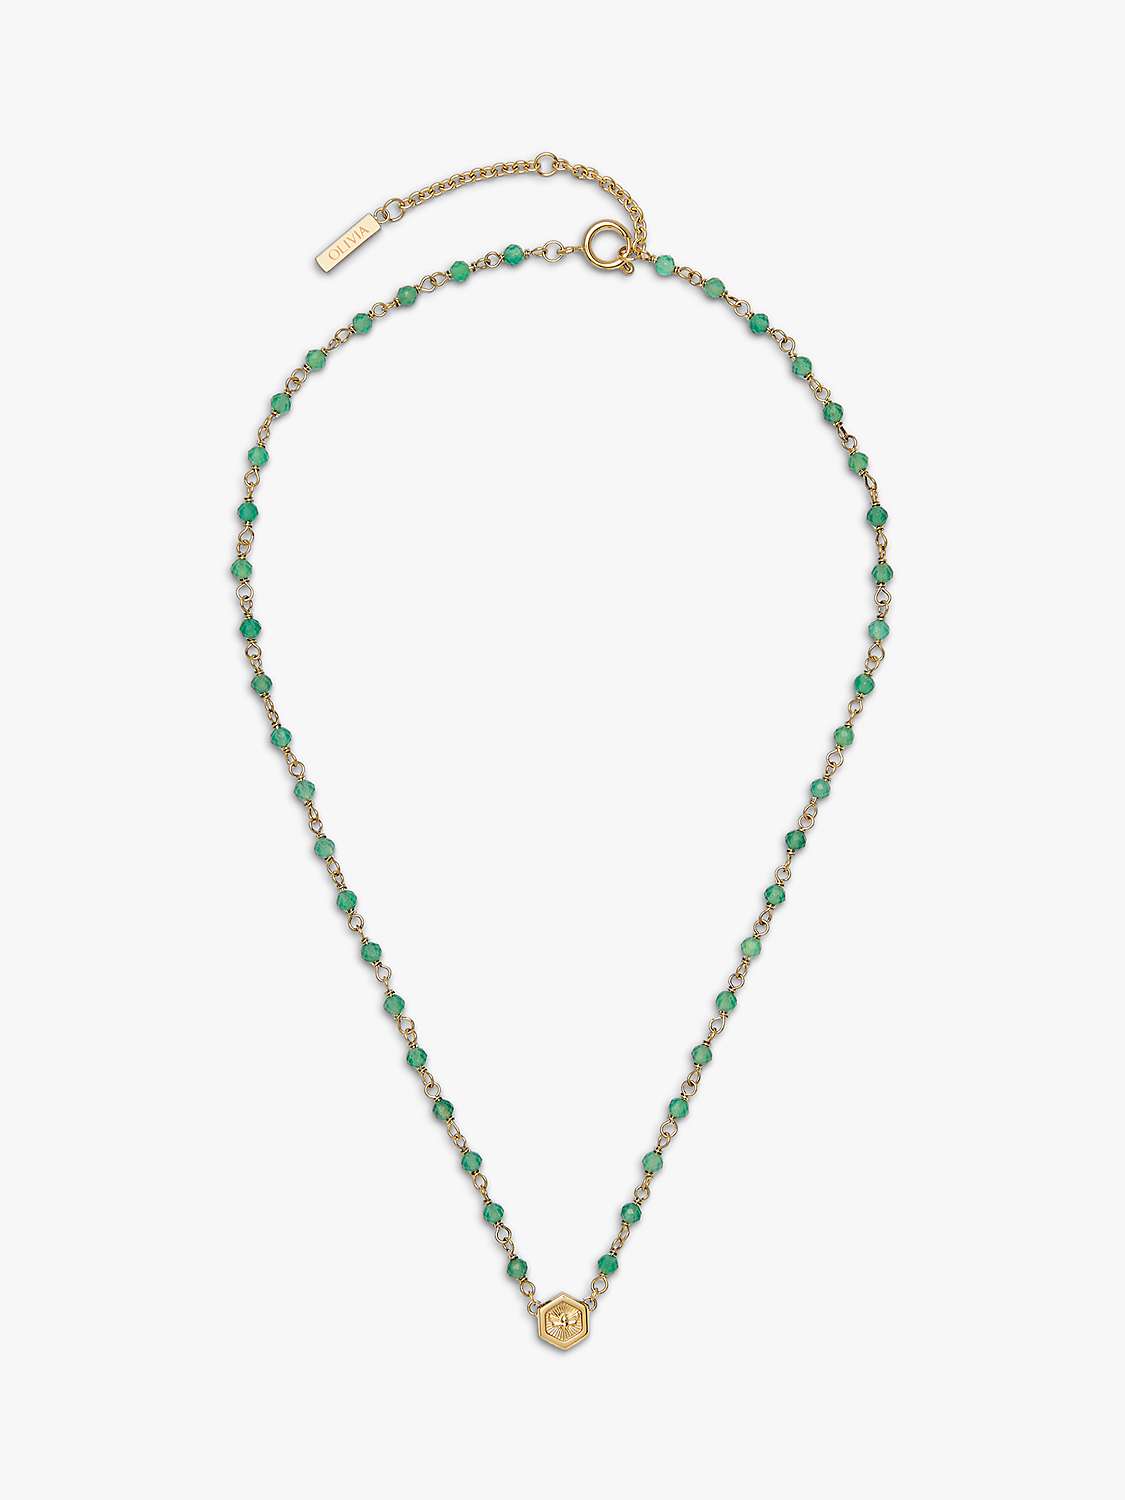 Buy Olivia Burton Sun And Moon Agate Pendant Necklace, Gold/Green Online at johnlewis.com